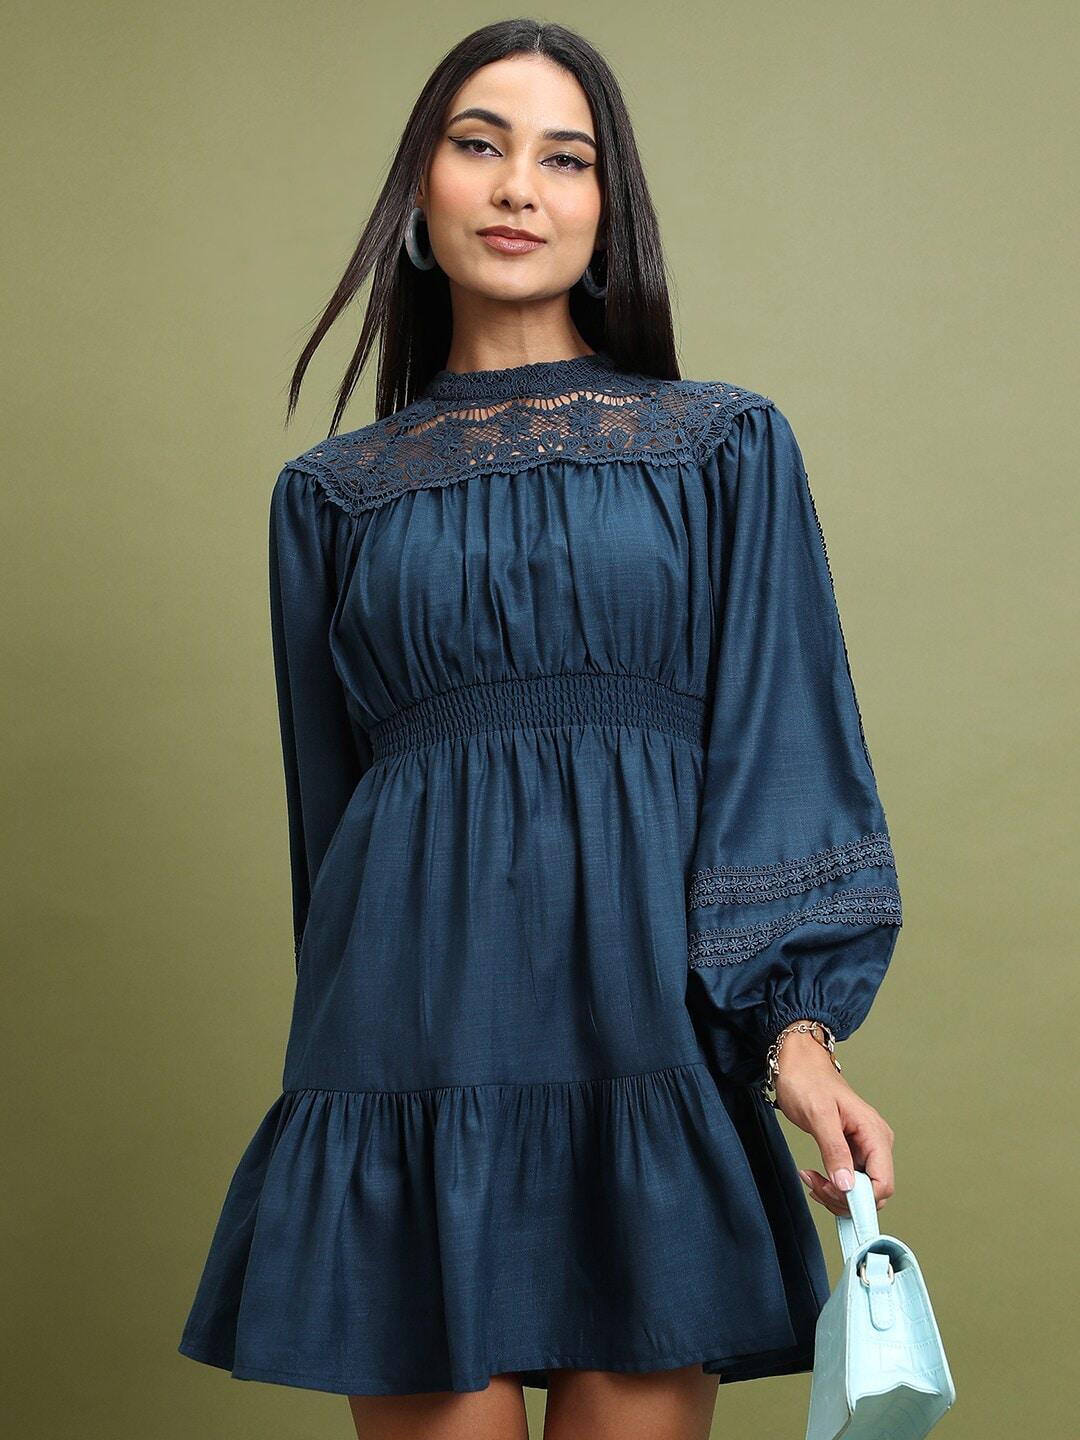 tokyo talkies teal high neck cuffed sleeves fit & flare dress